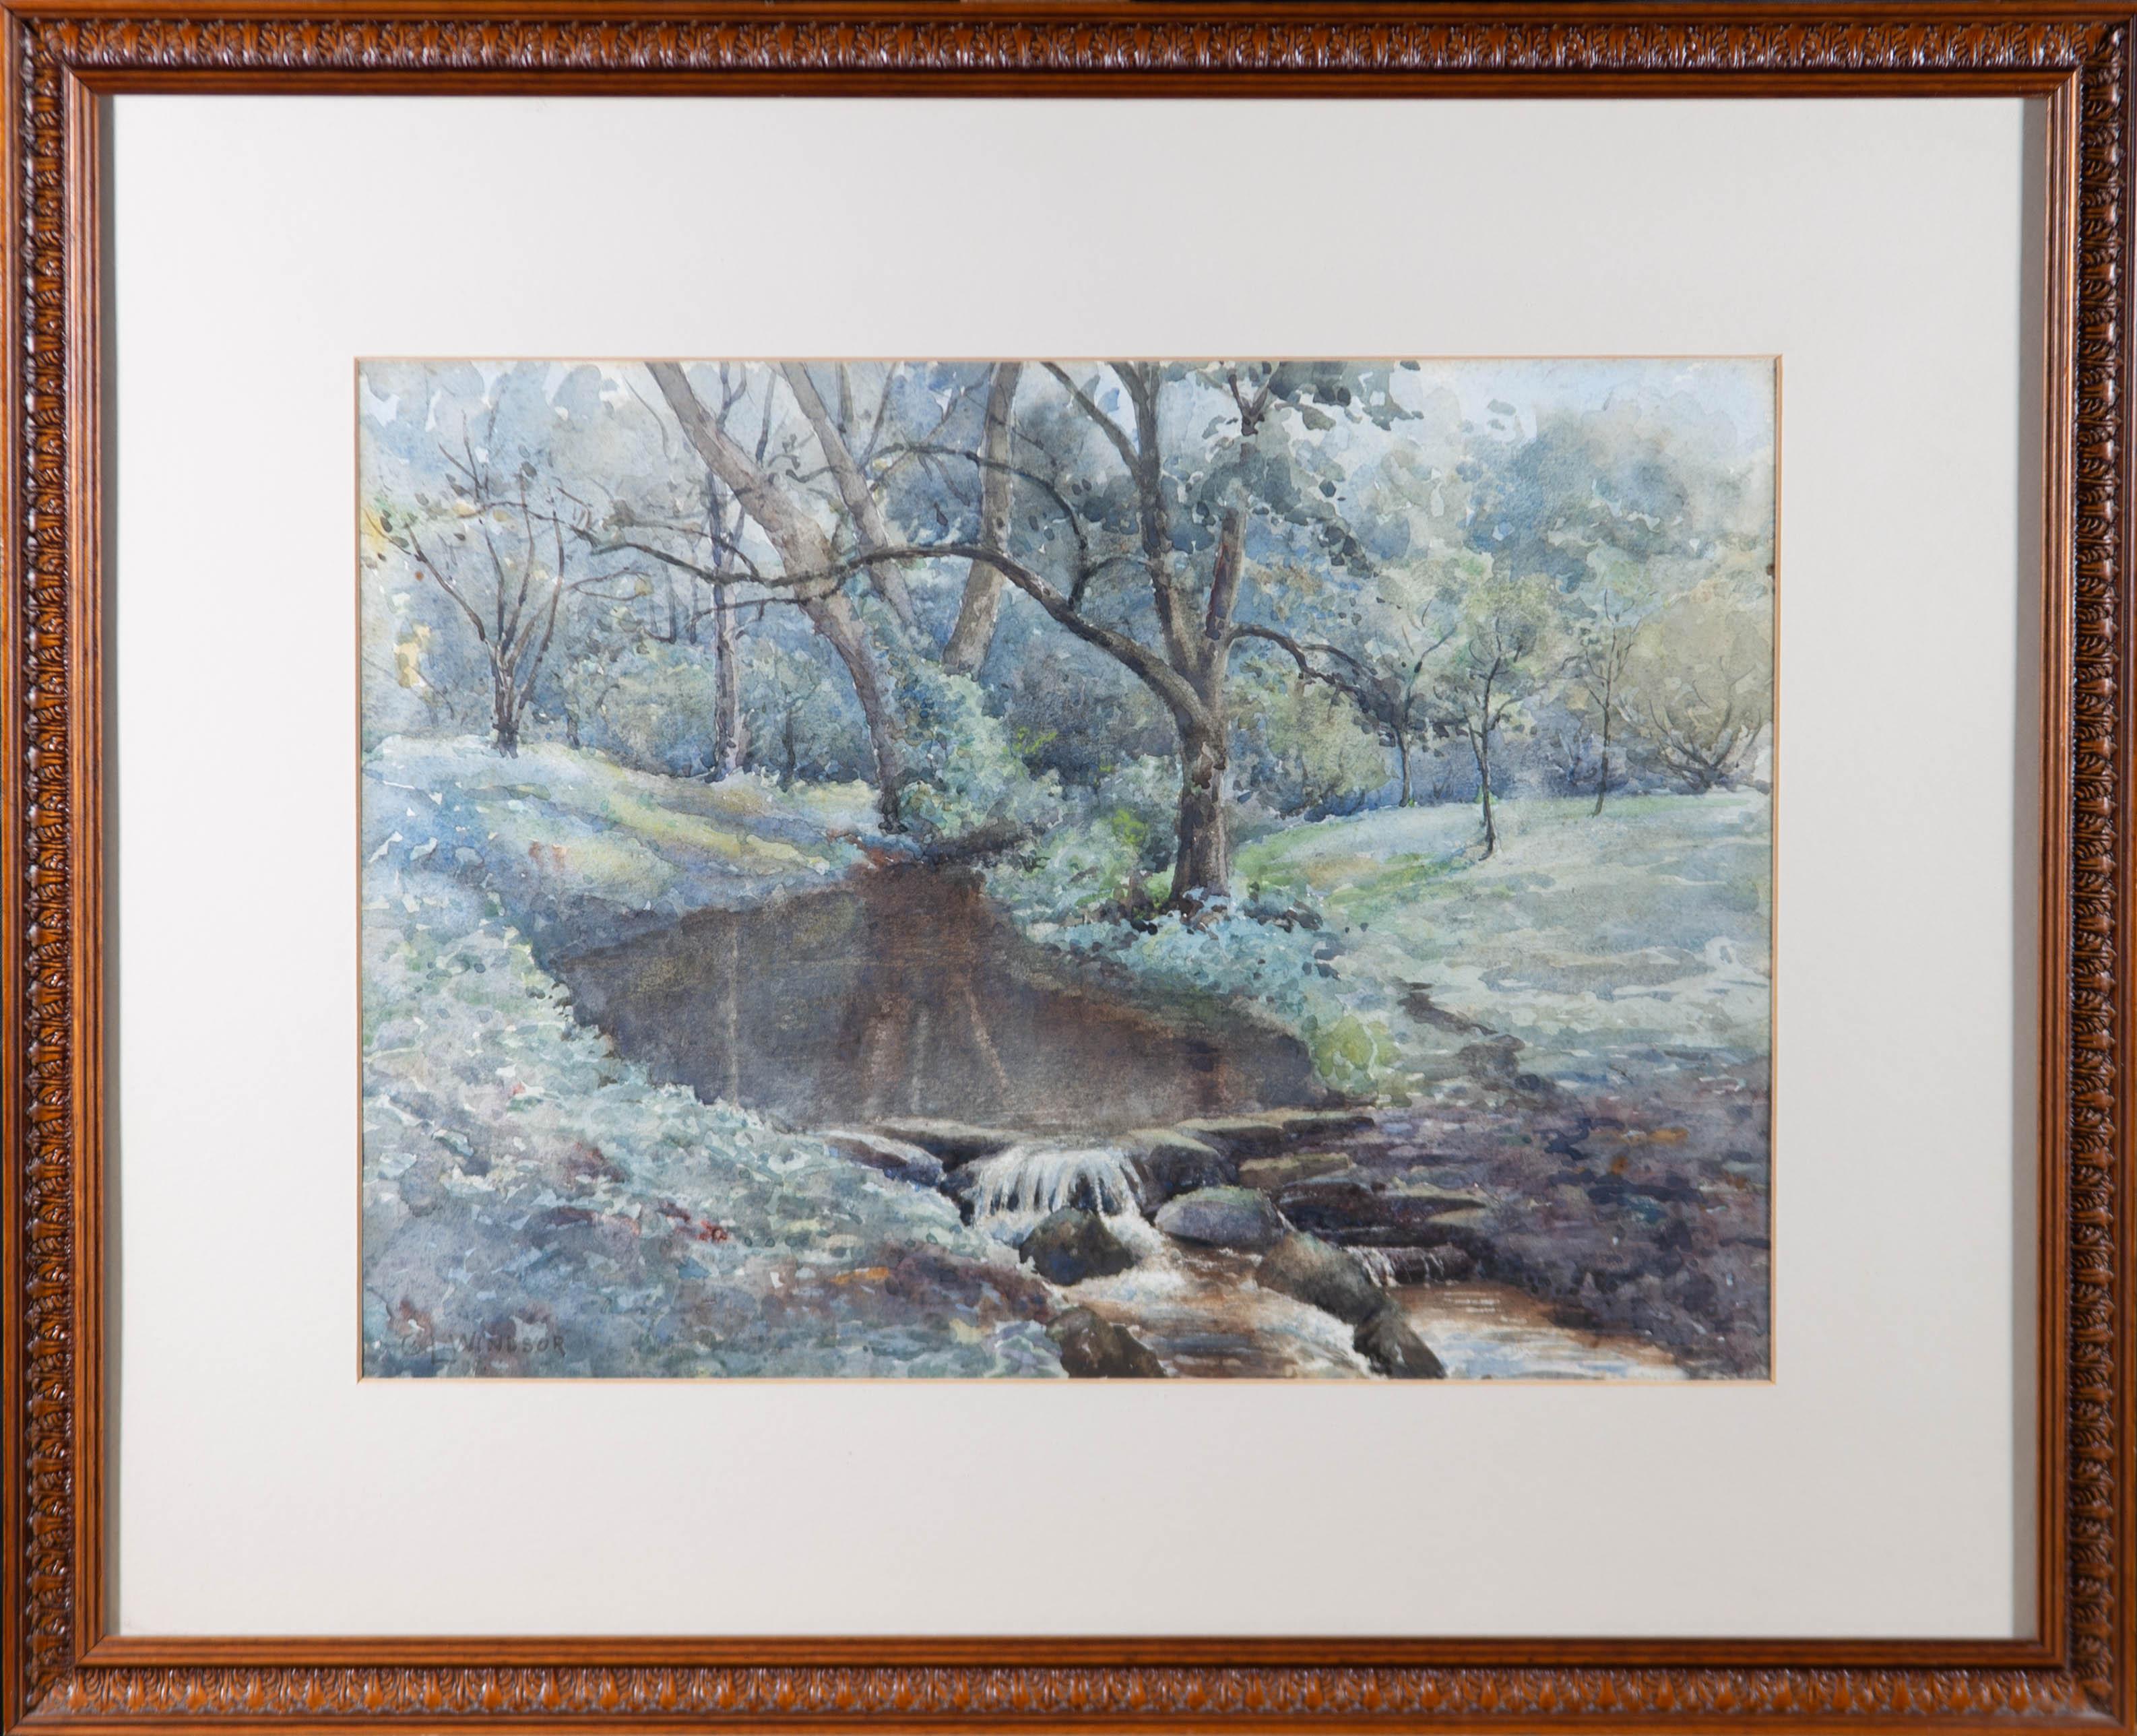 Unknown Landscape Art - C.L. Windsor - Signed & Framed Early 20th Century Watercolour, Woodland Stream